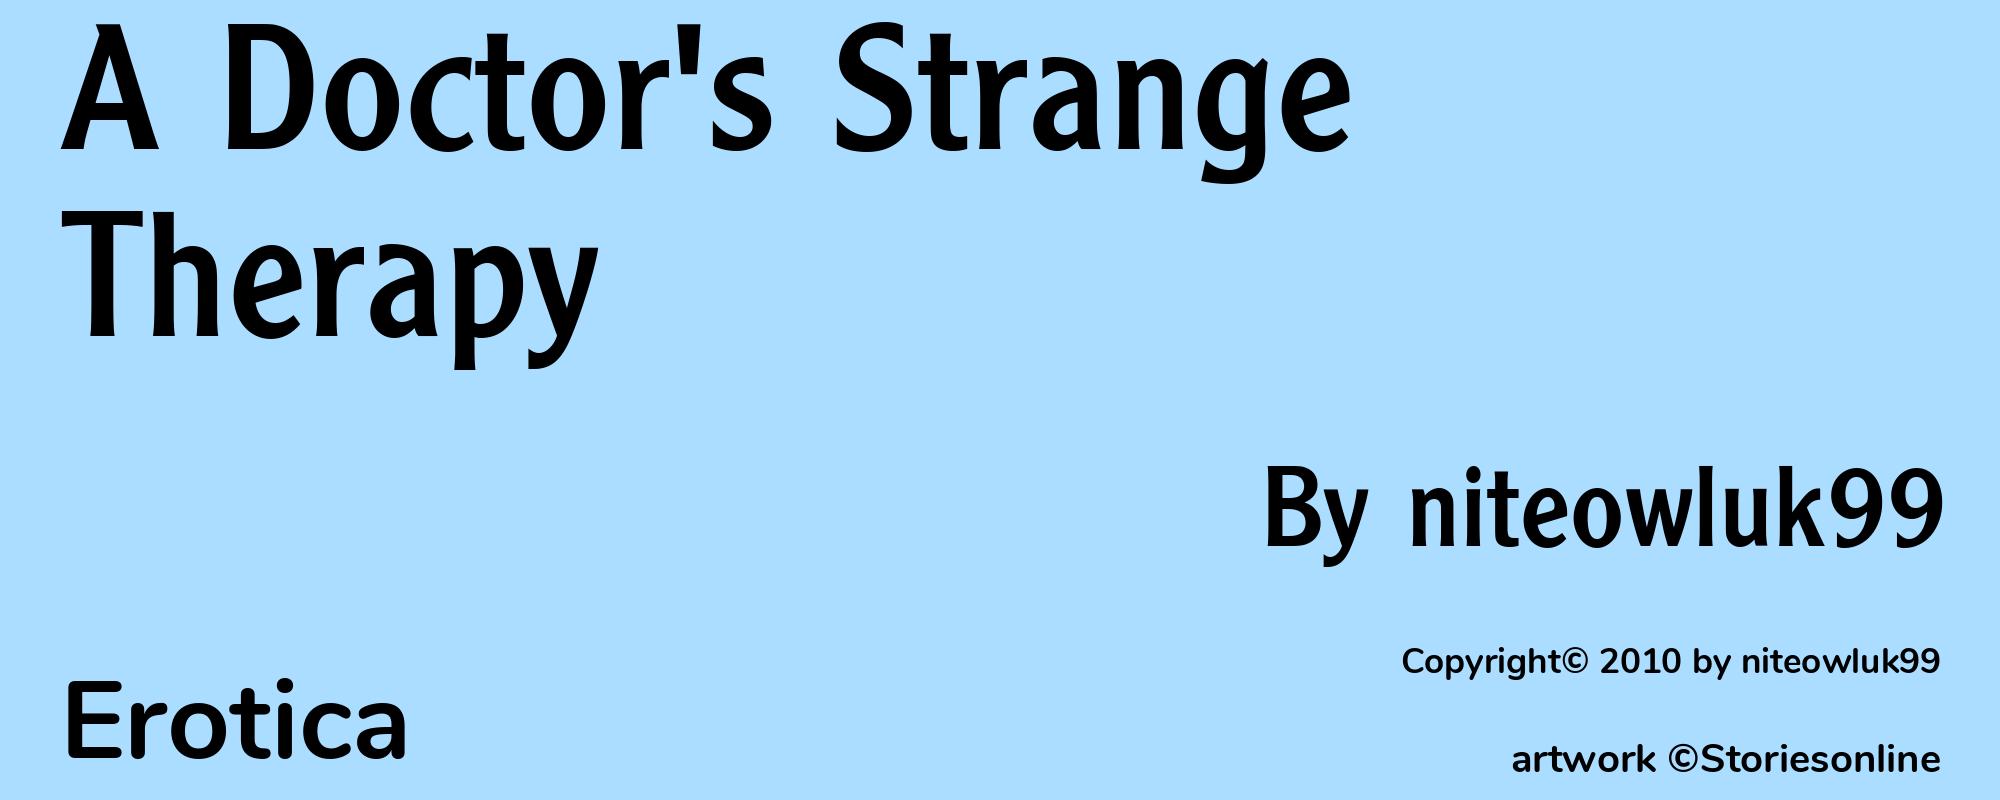 A Doctor's Strange Therapy - Cover